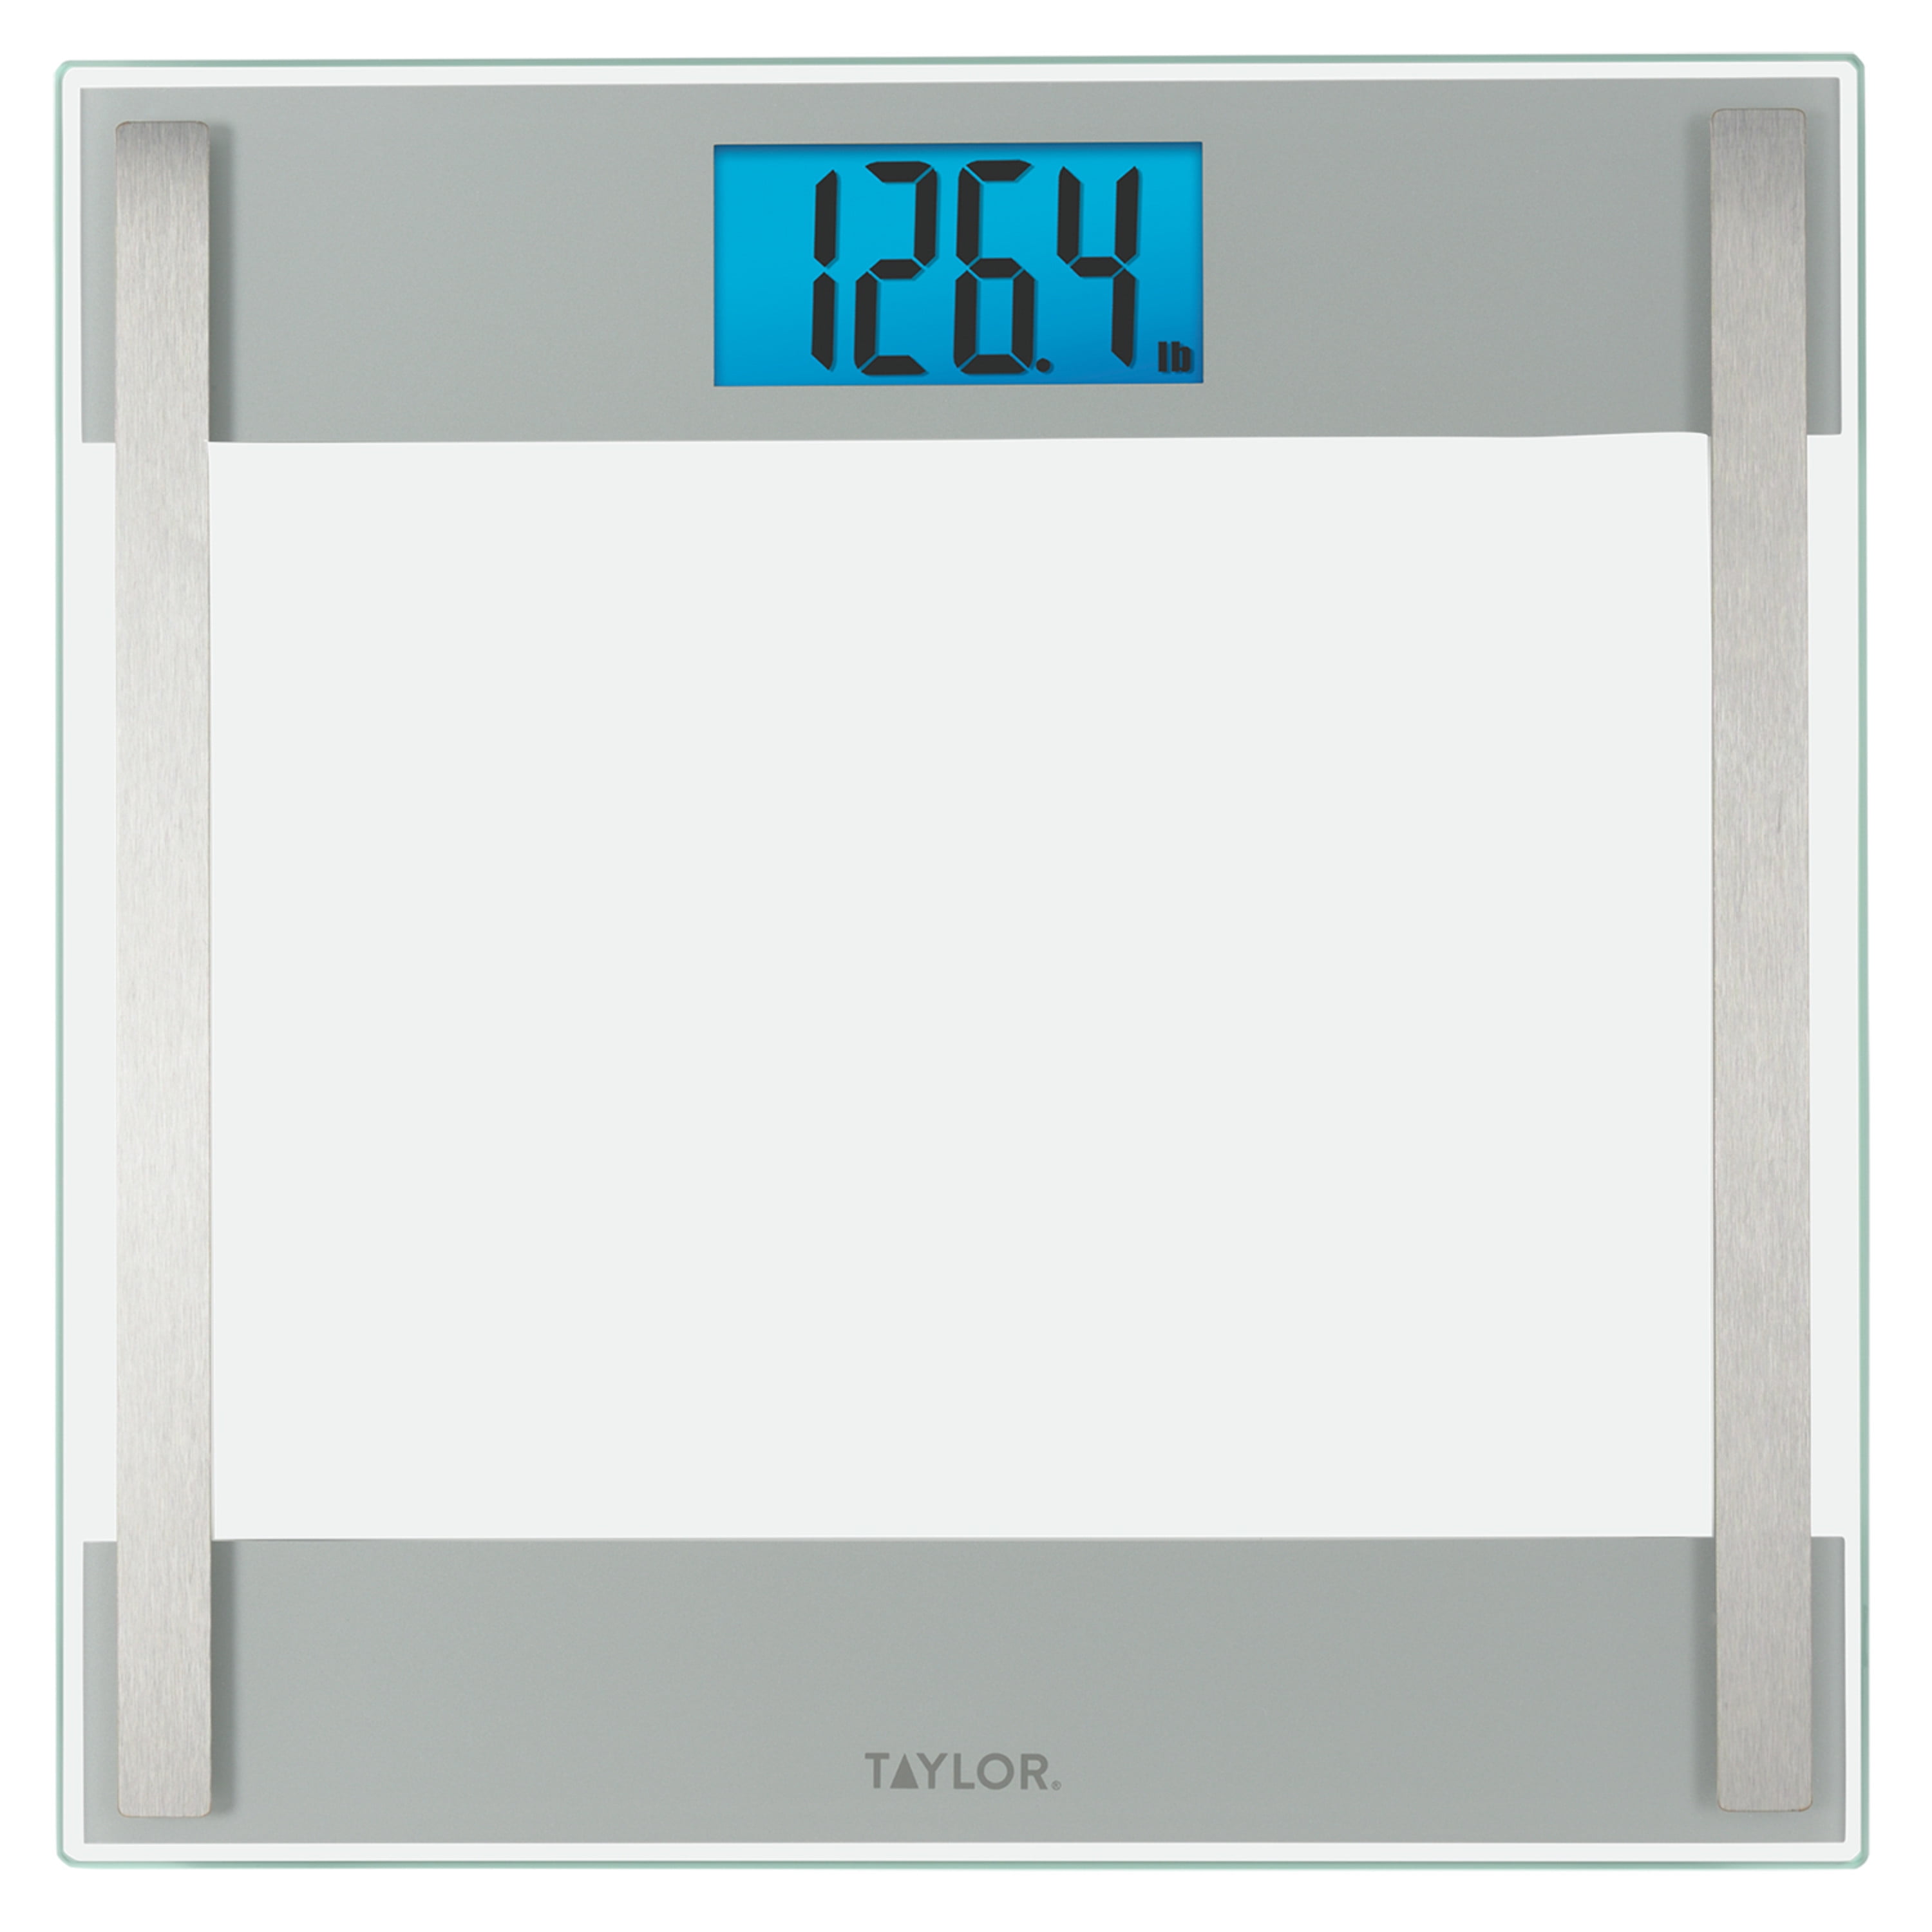 Taylor Digital Bathroom Scale Clear Glass Silver Accents 